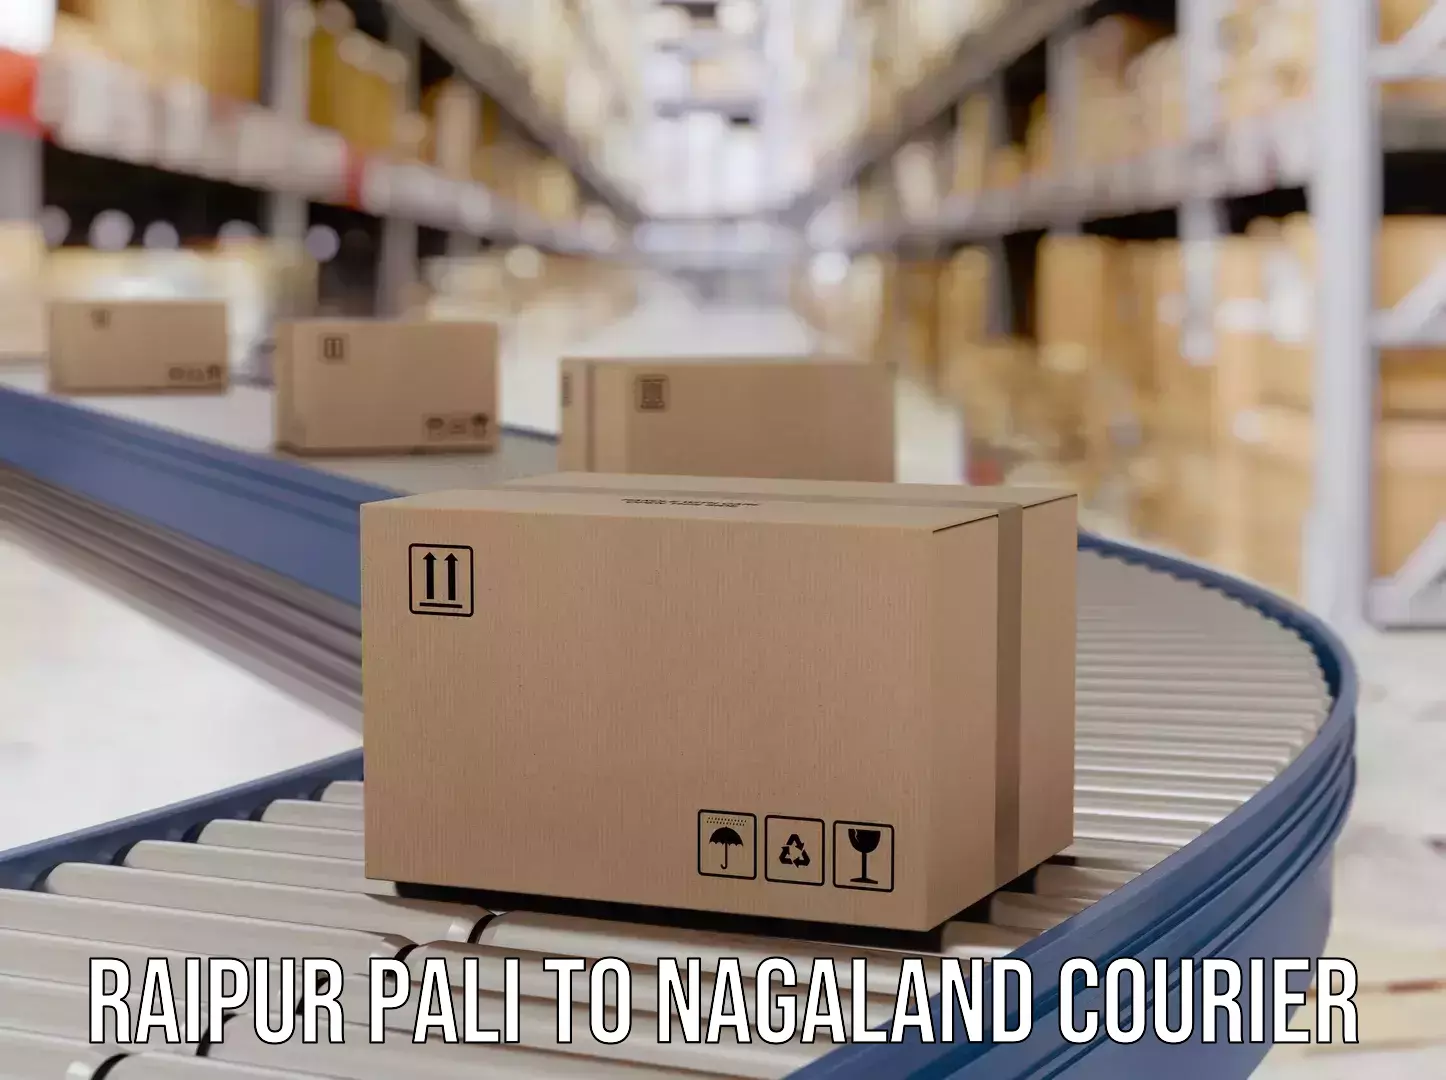 Advanced courier platforms in Raipur Pali to Nagaland